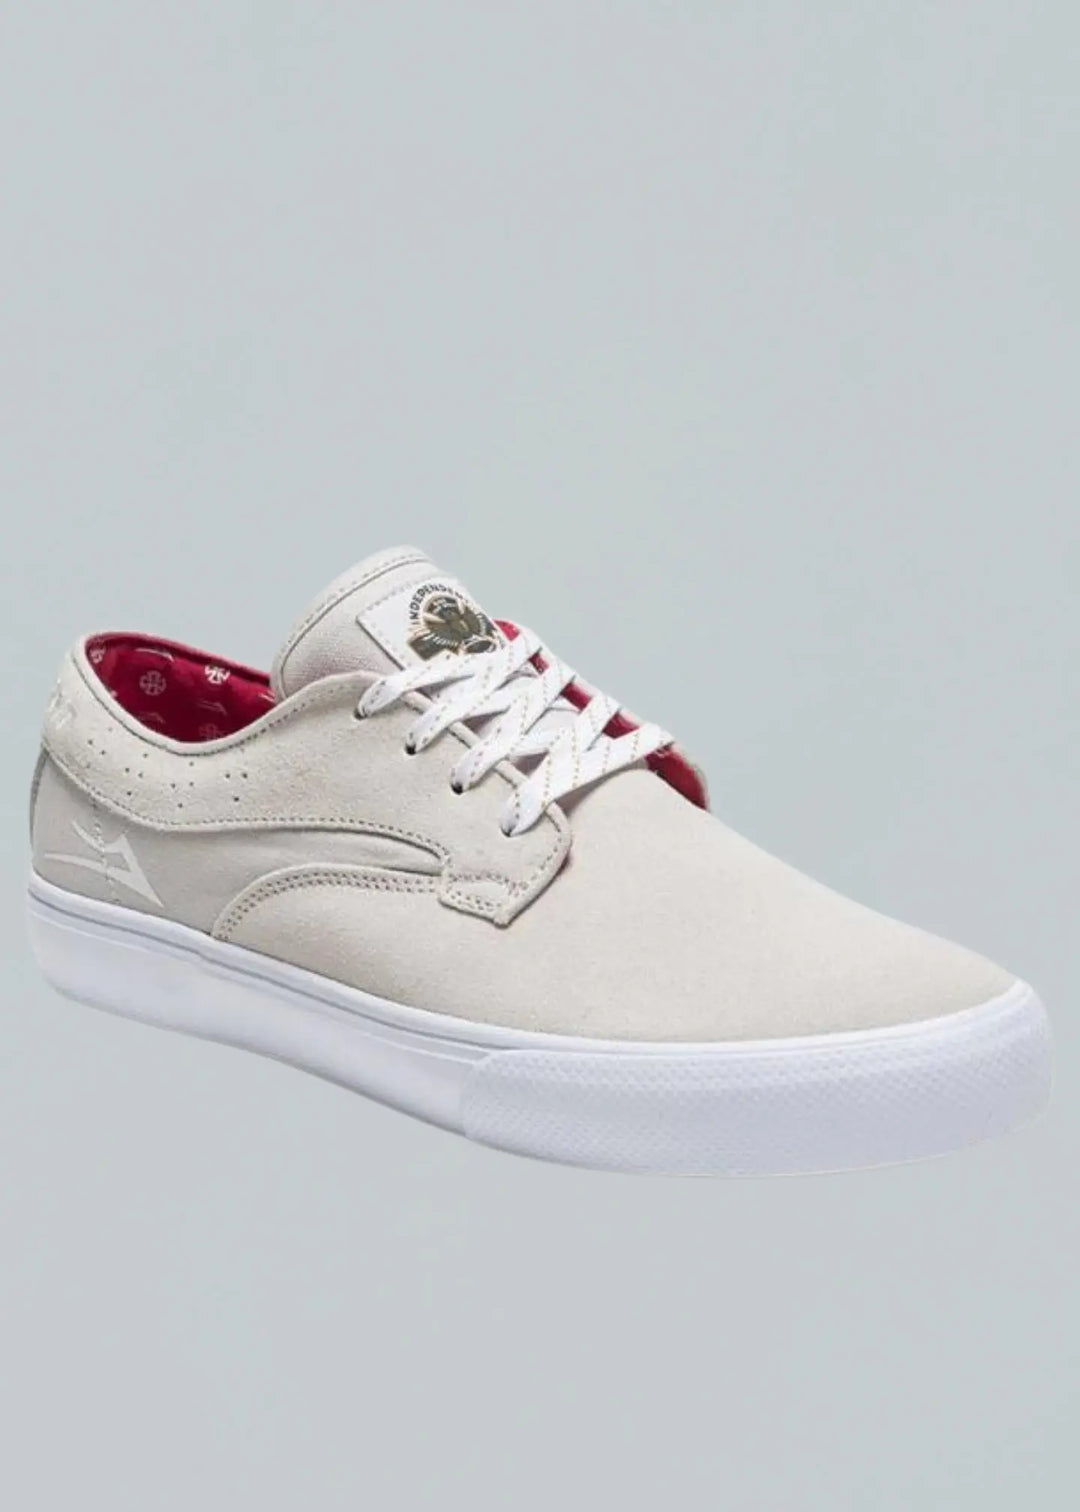 Lakai X Independent Riley White Suede Gr.44.5